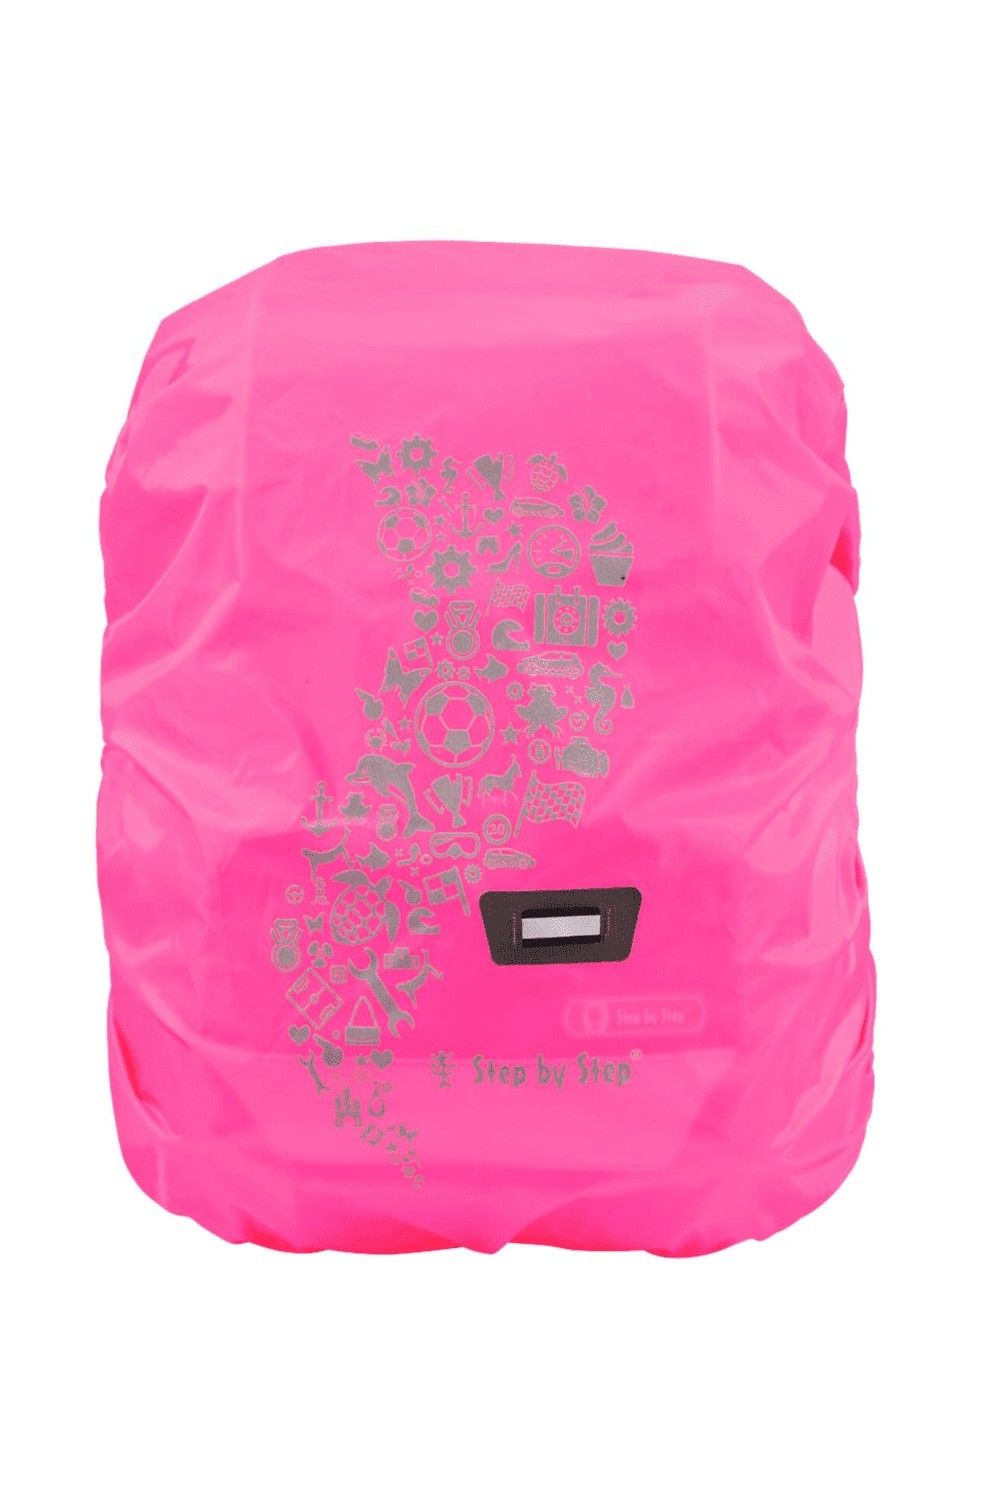 Step by step rain protection and safety cover for school counter pink